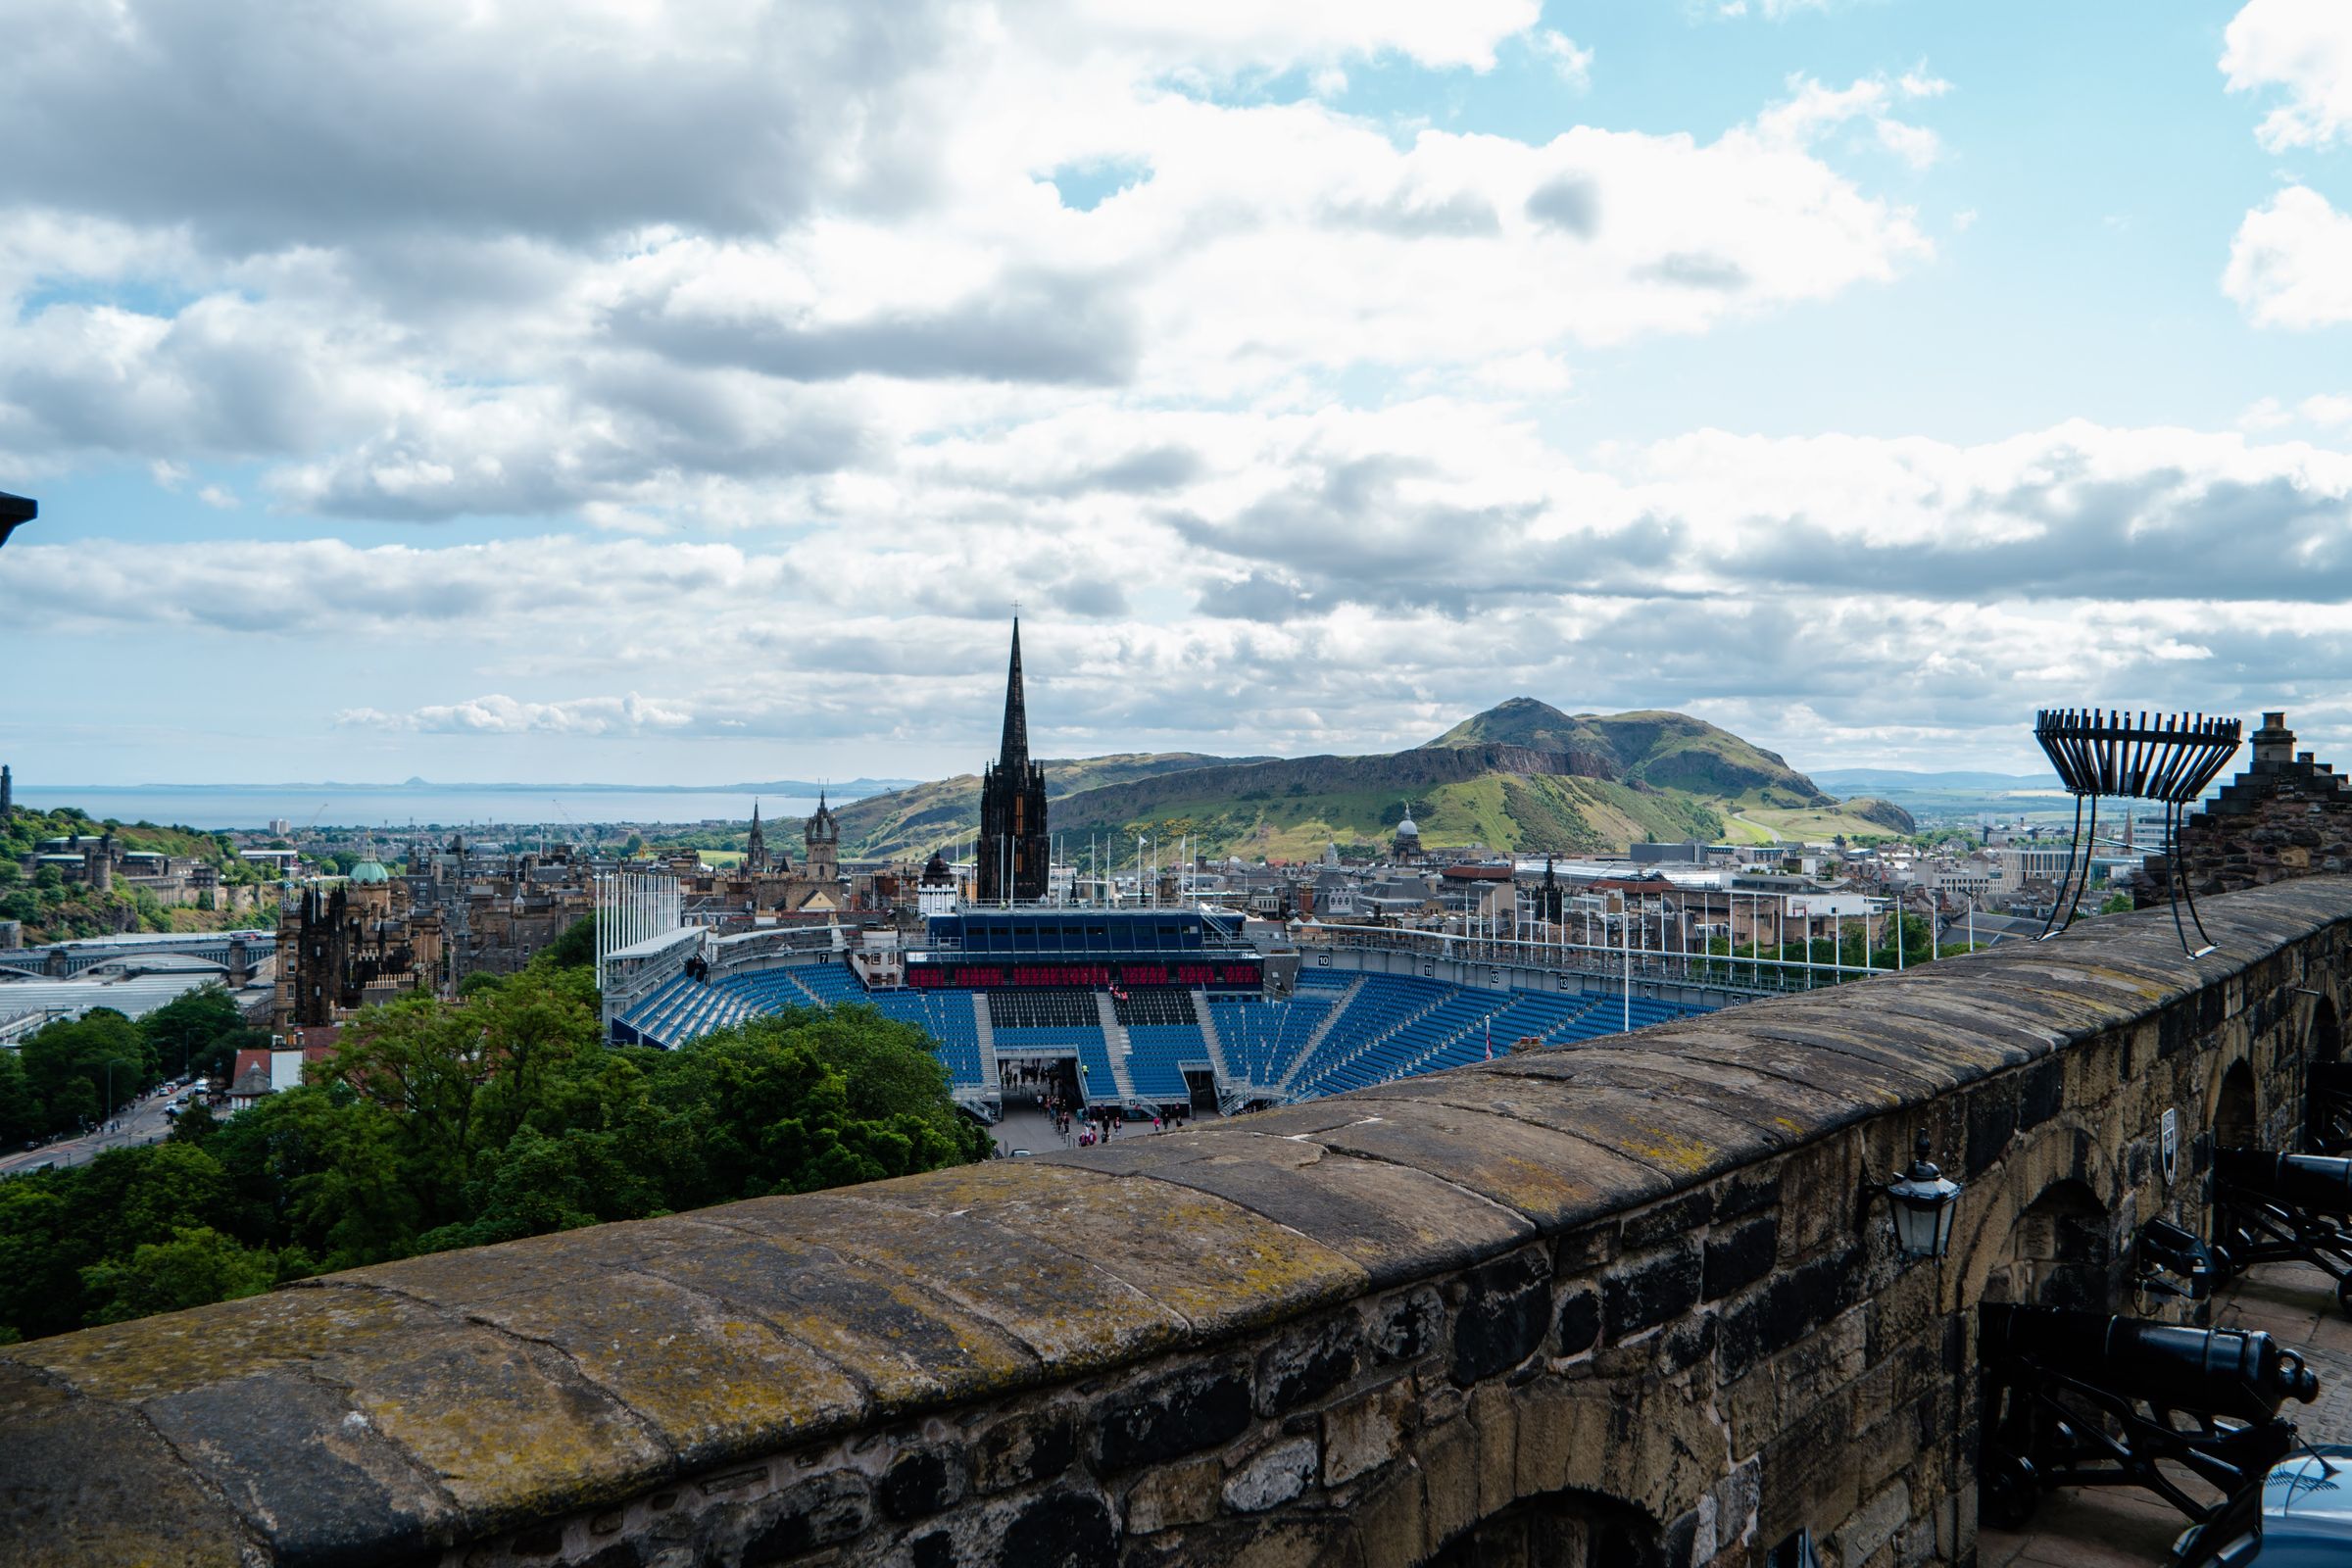 Overlooking the grandstands for the Royal Edinburgh Military Tattoo